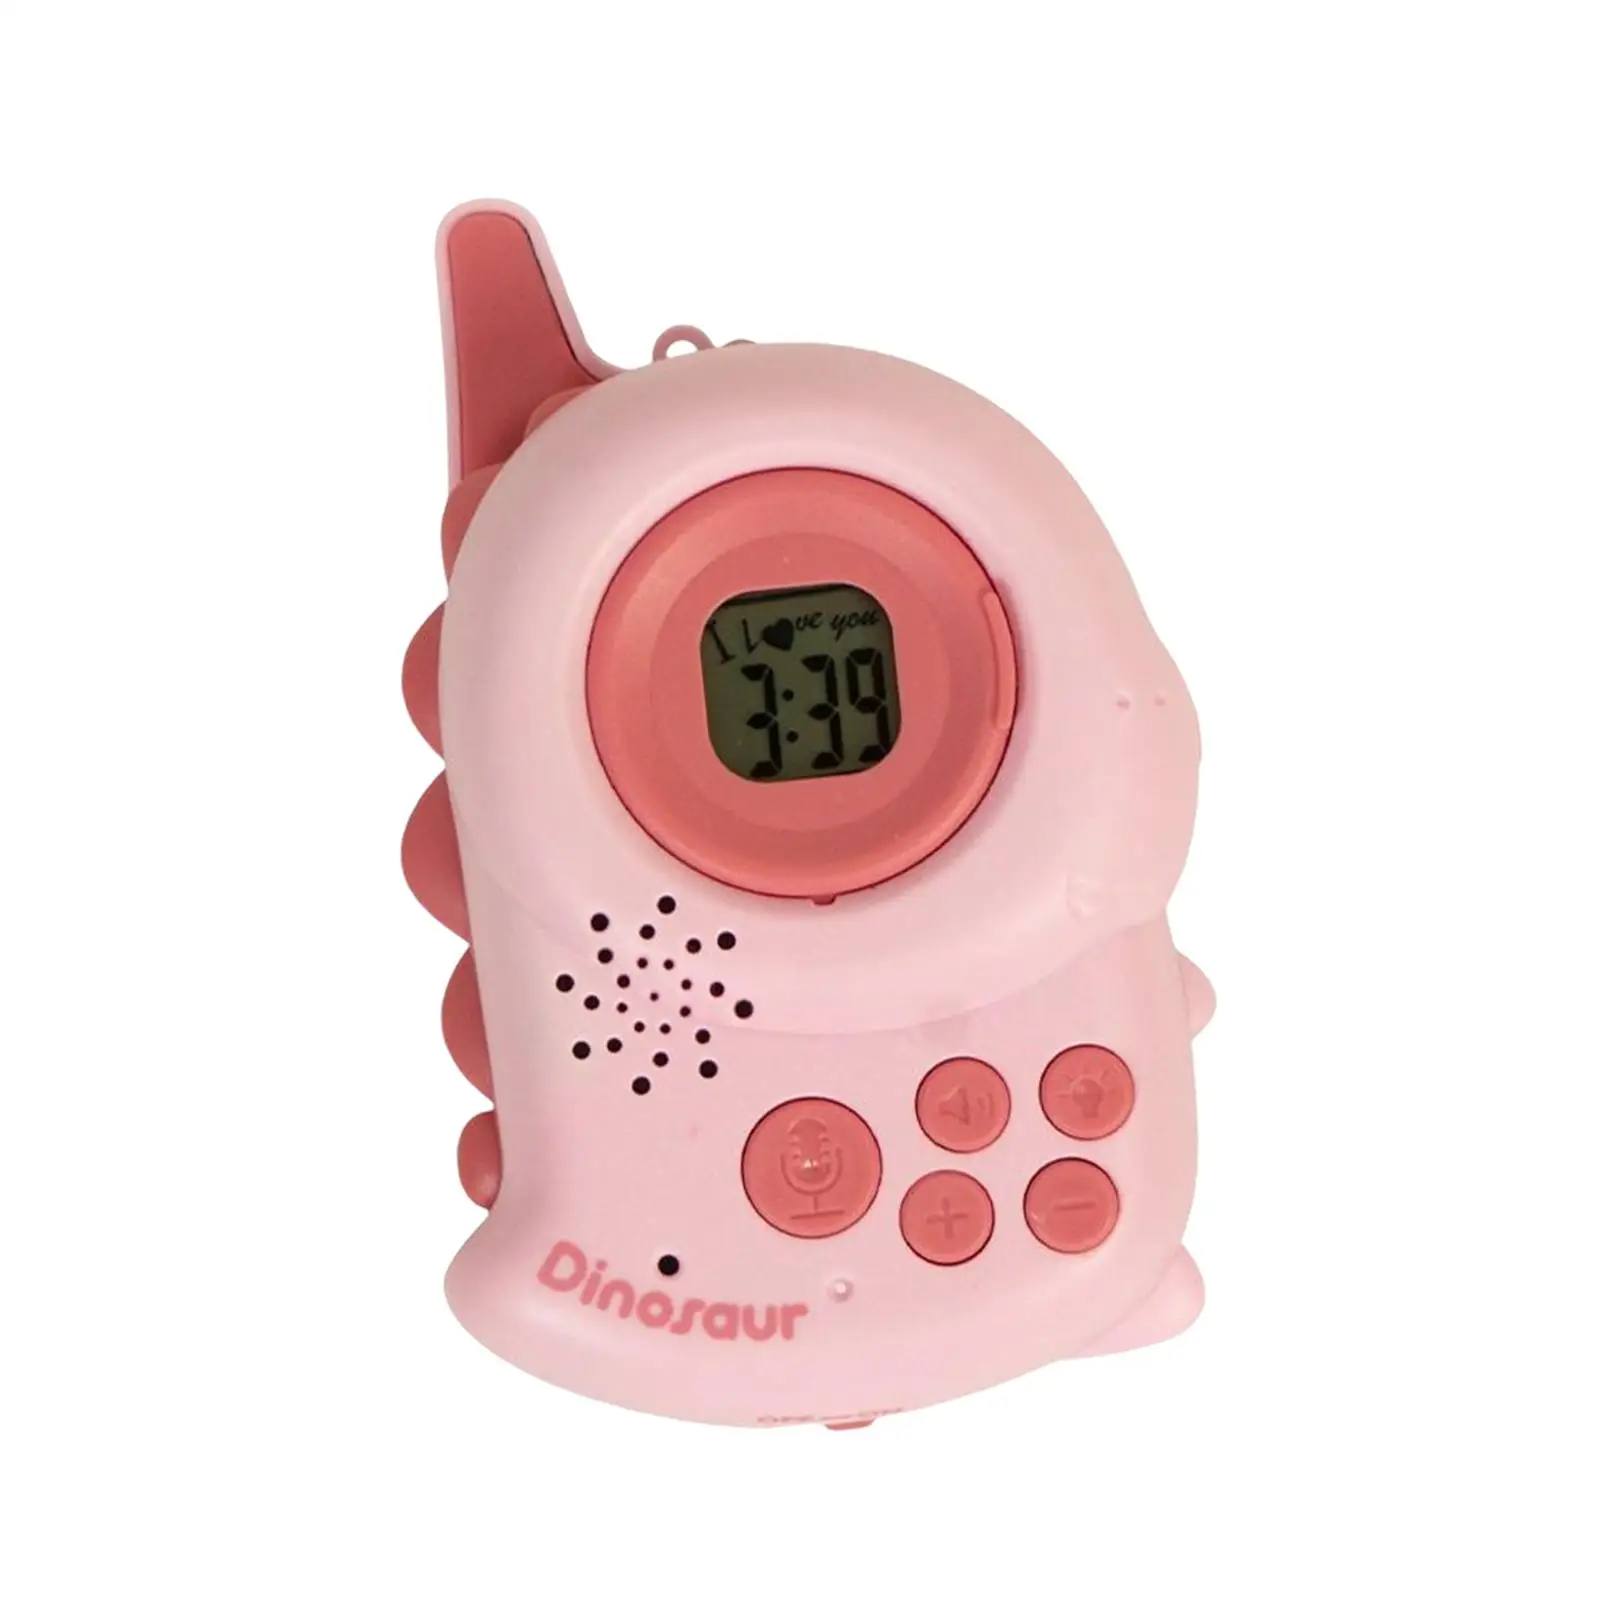 Handheld Walkie Talkies for Kids Lovely for Camping Outside Summer Children Gifts